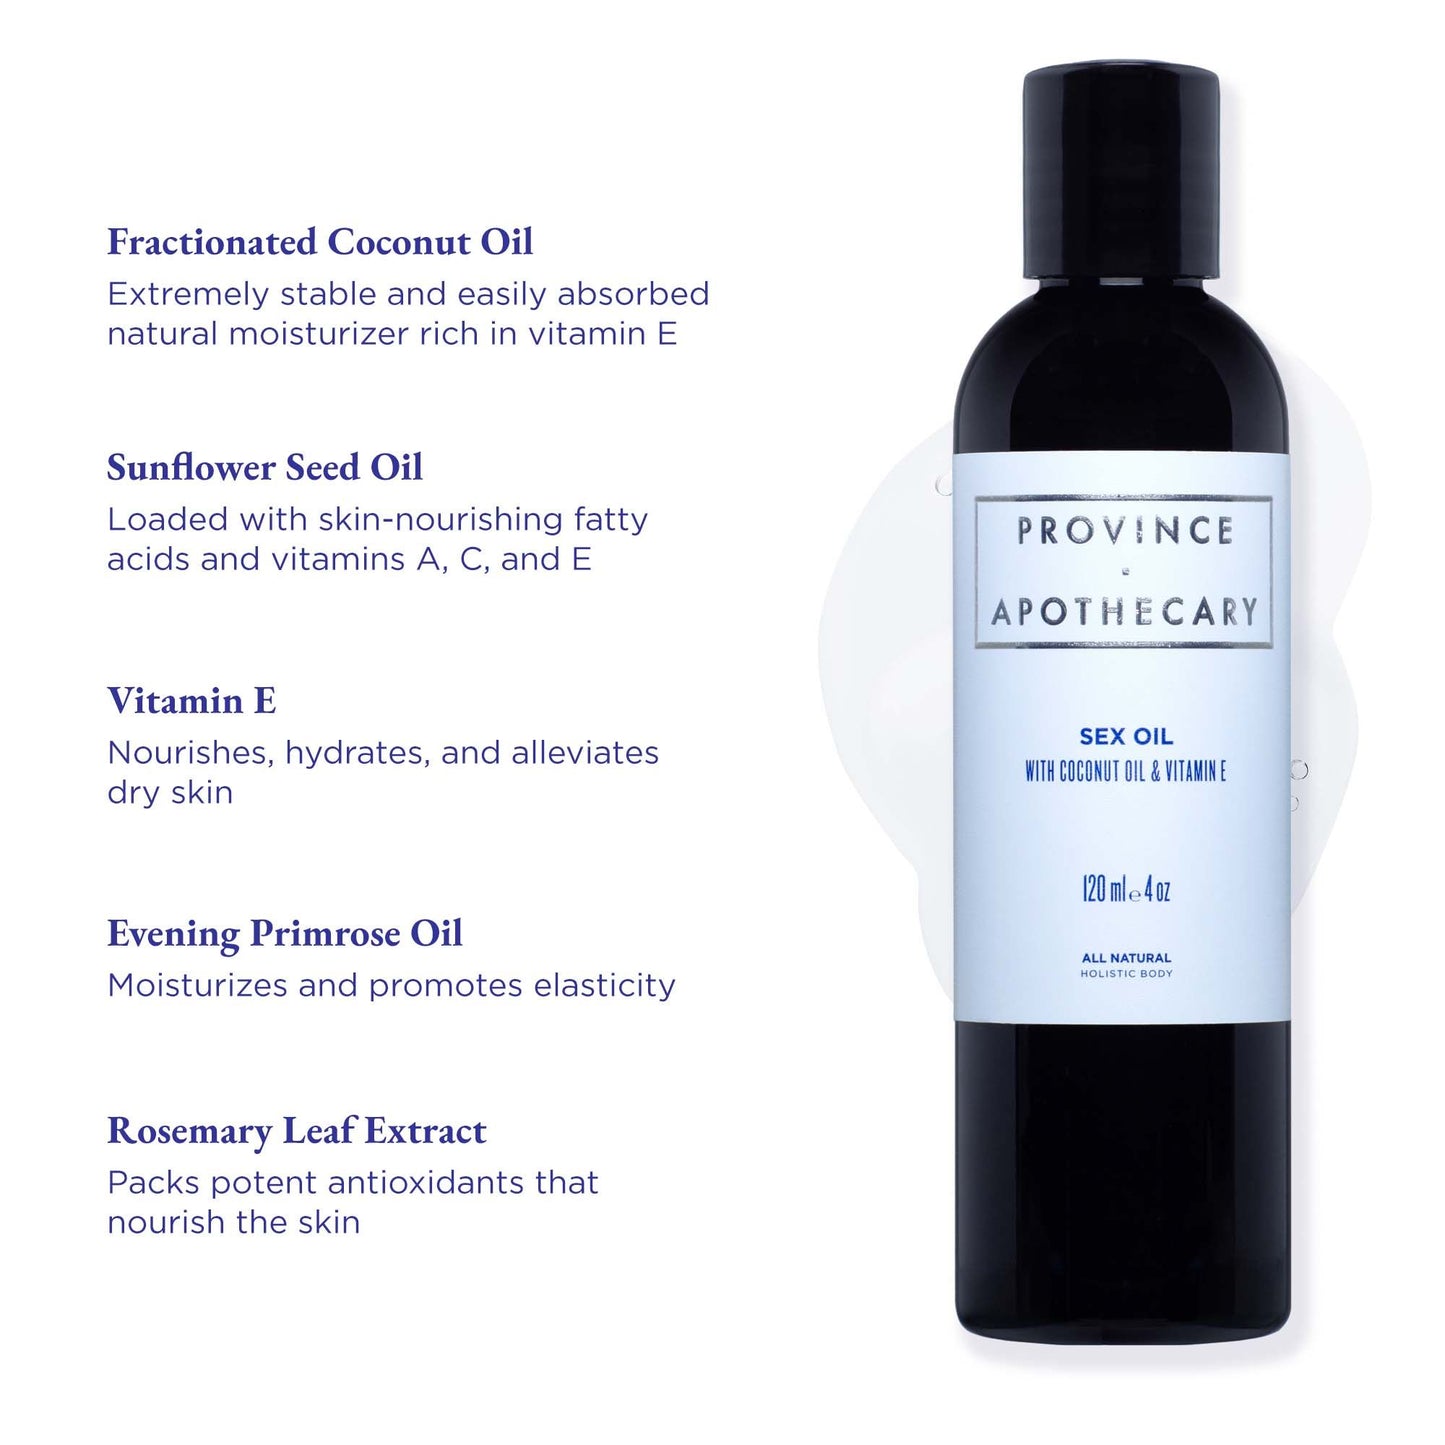 Province Apothecary Sex Oil 120ml